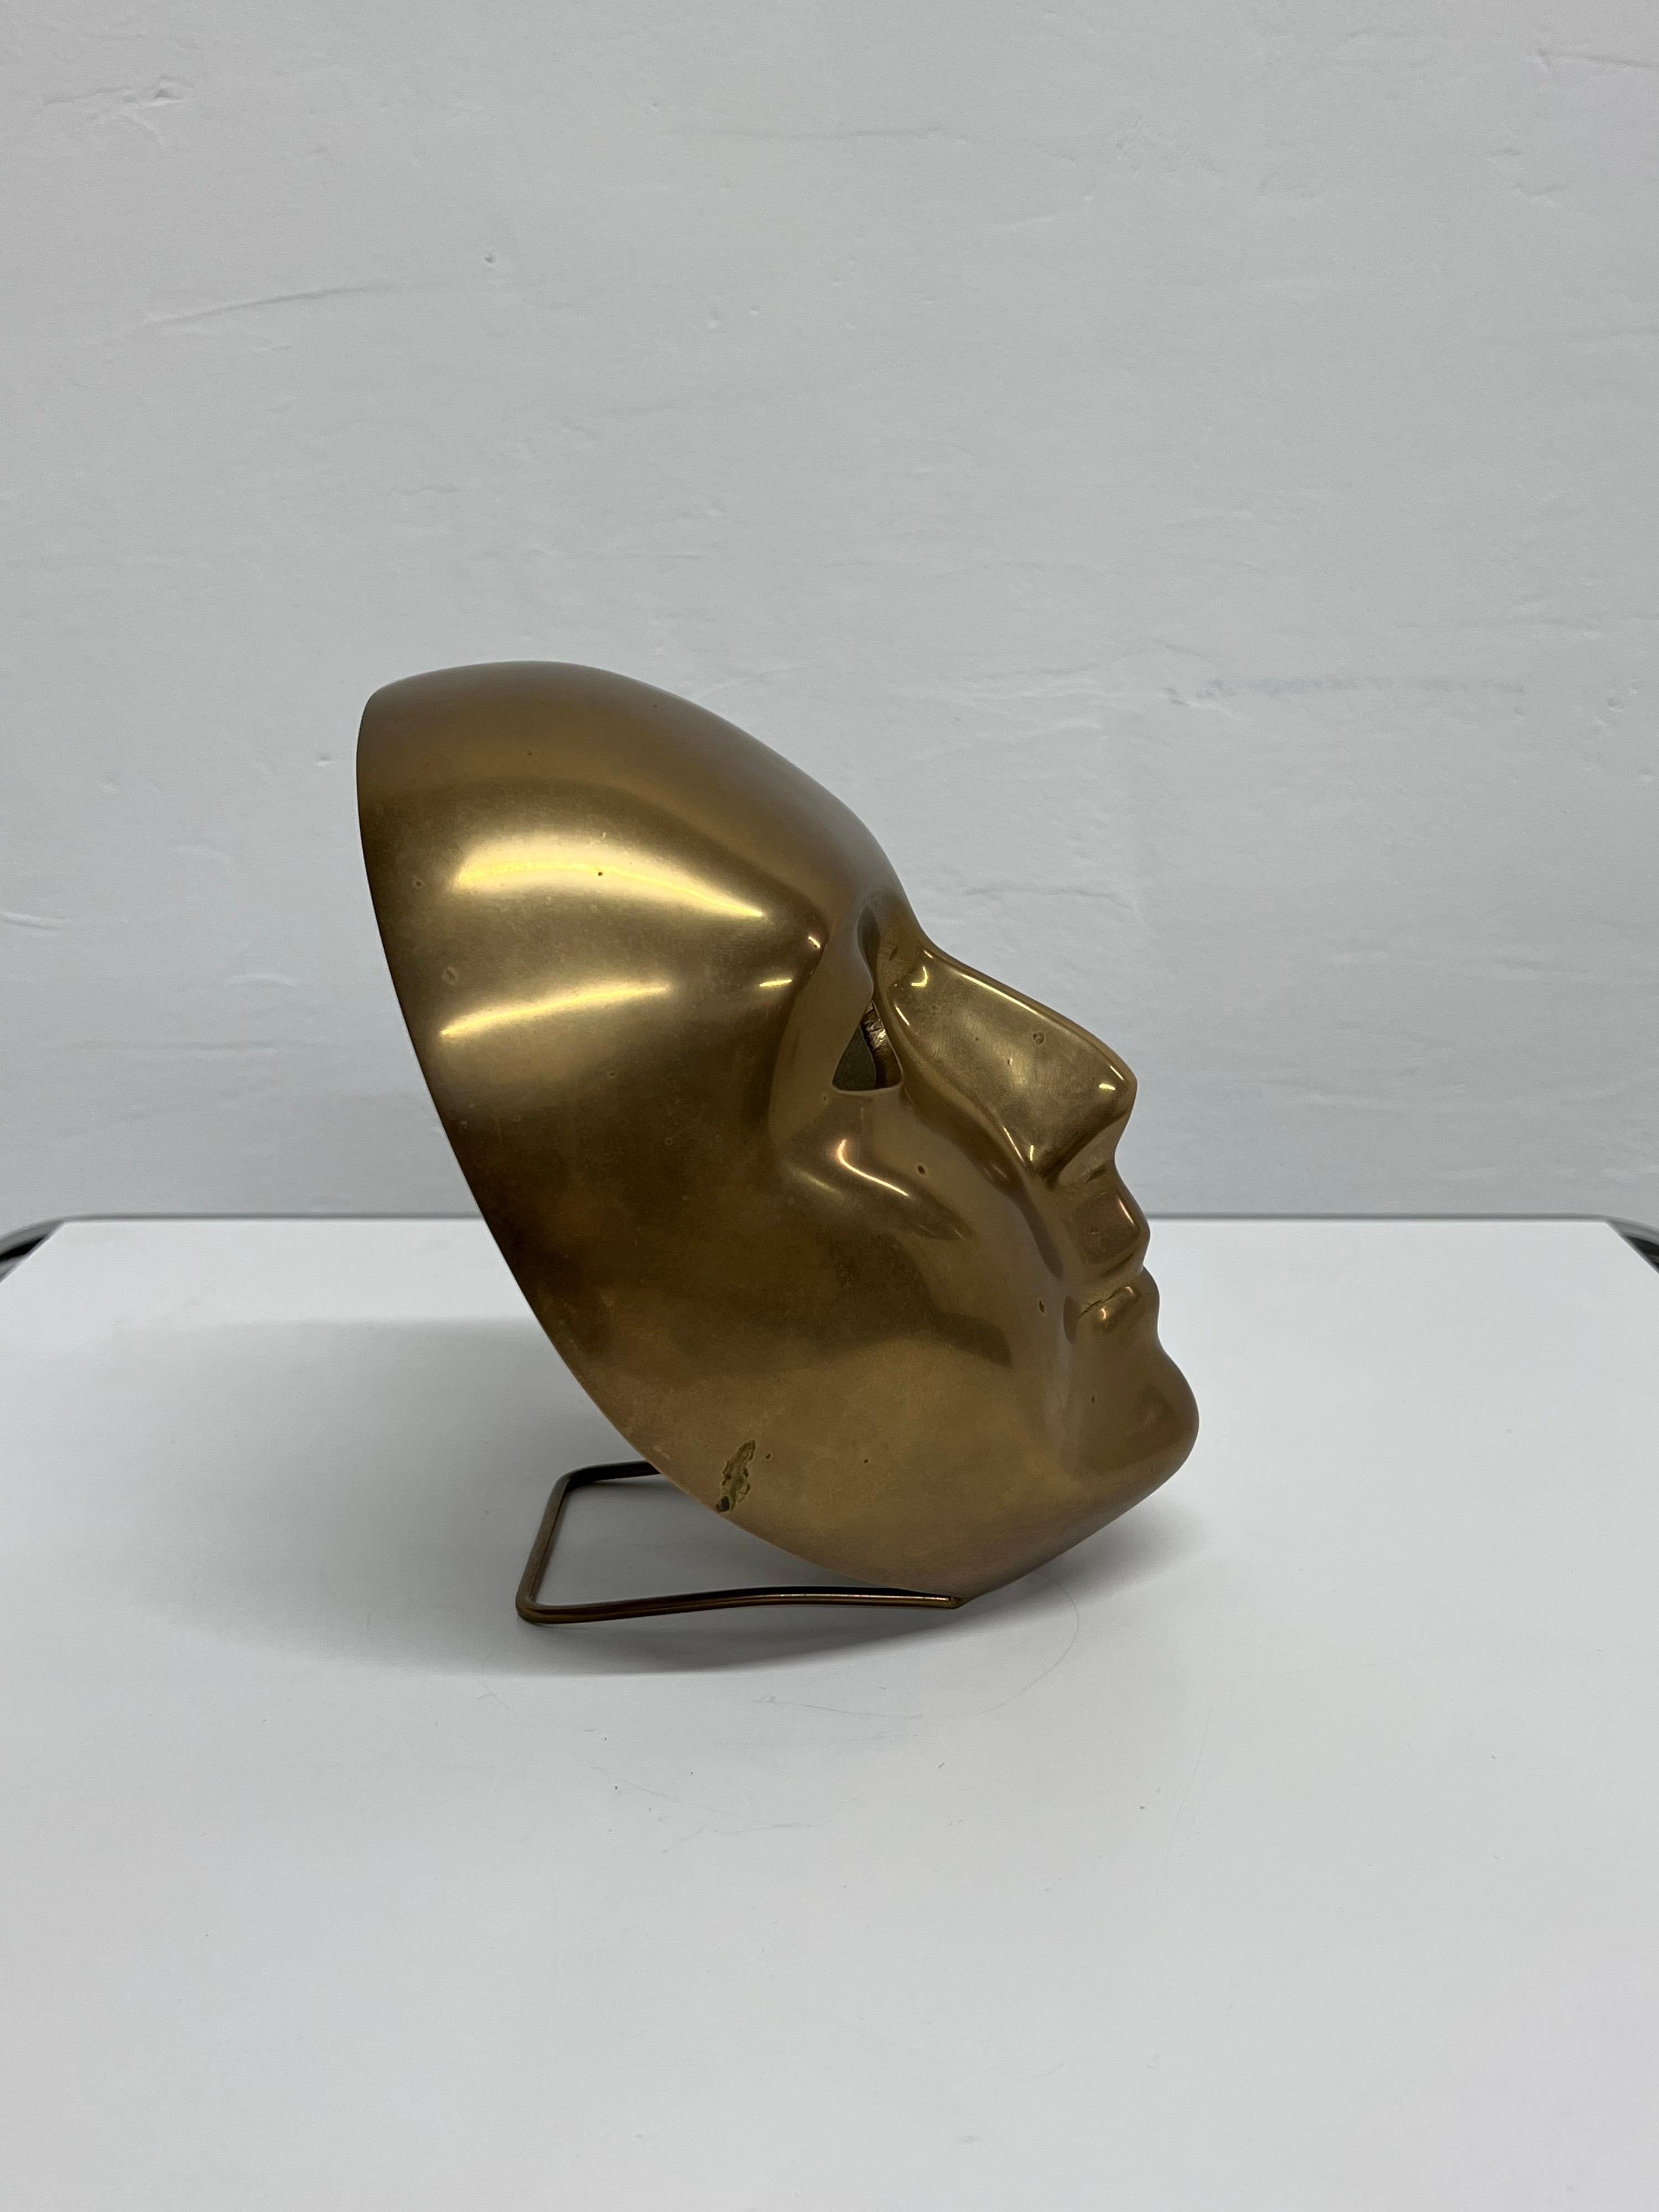 20th Century Polished Bronze Venetian Mask Sculpture by Volare, 1994 For Sale